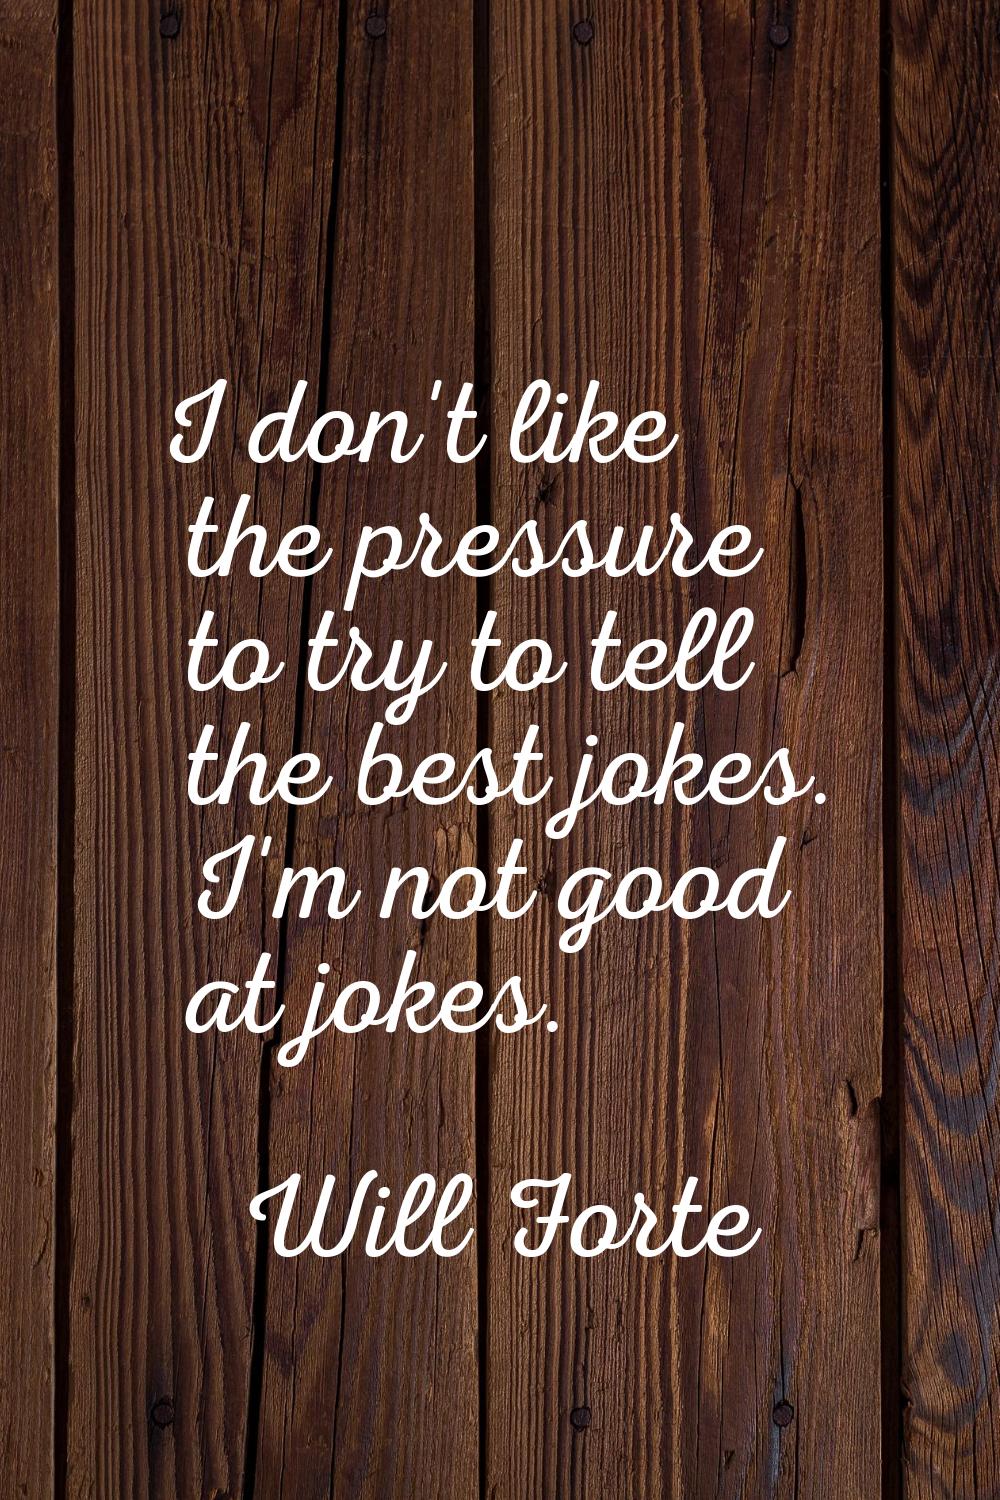 I don't like the pressure to try to tell the best jokes. I'm not good at jokes.